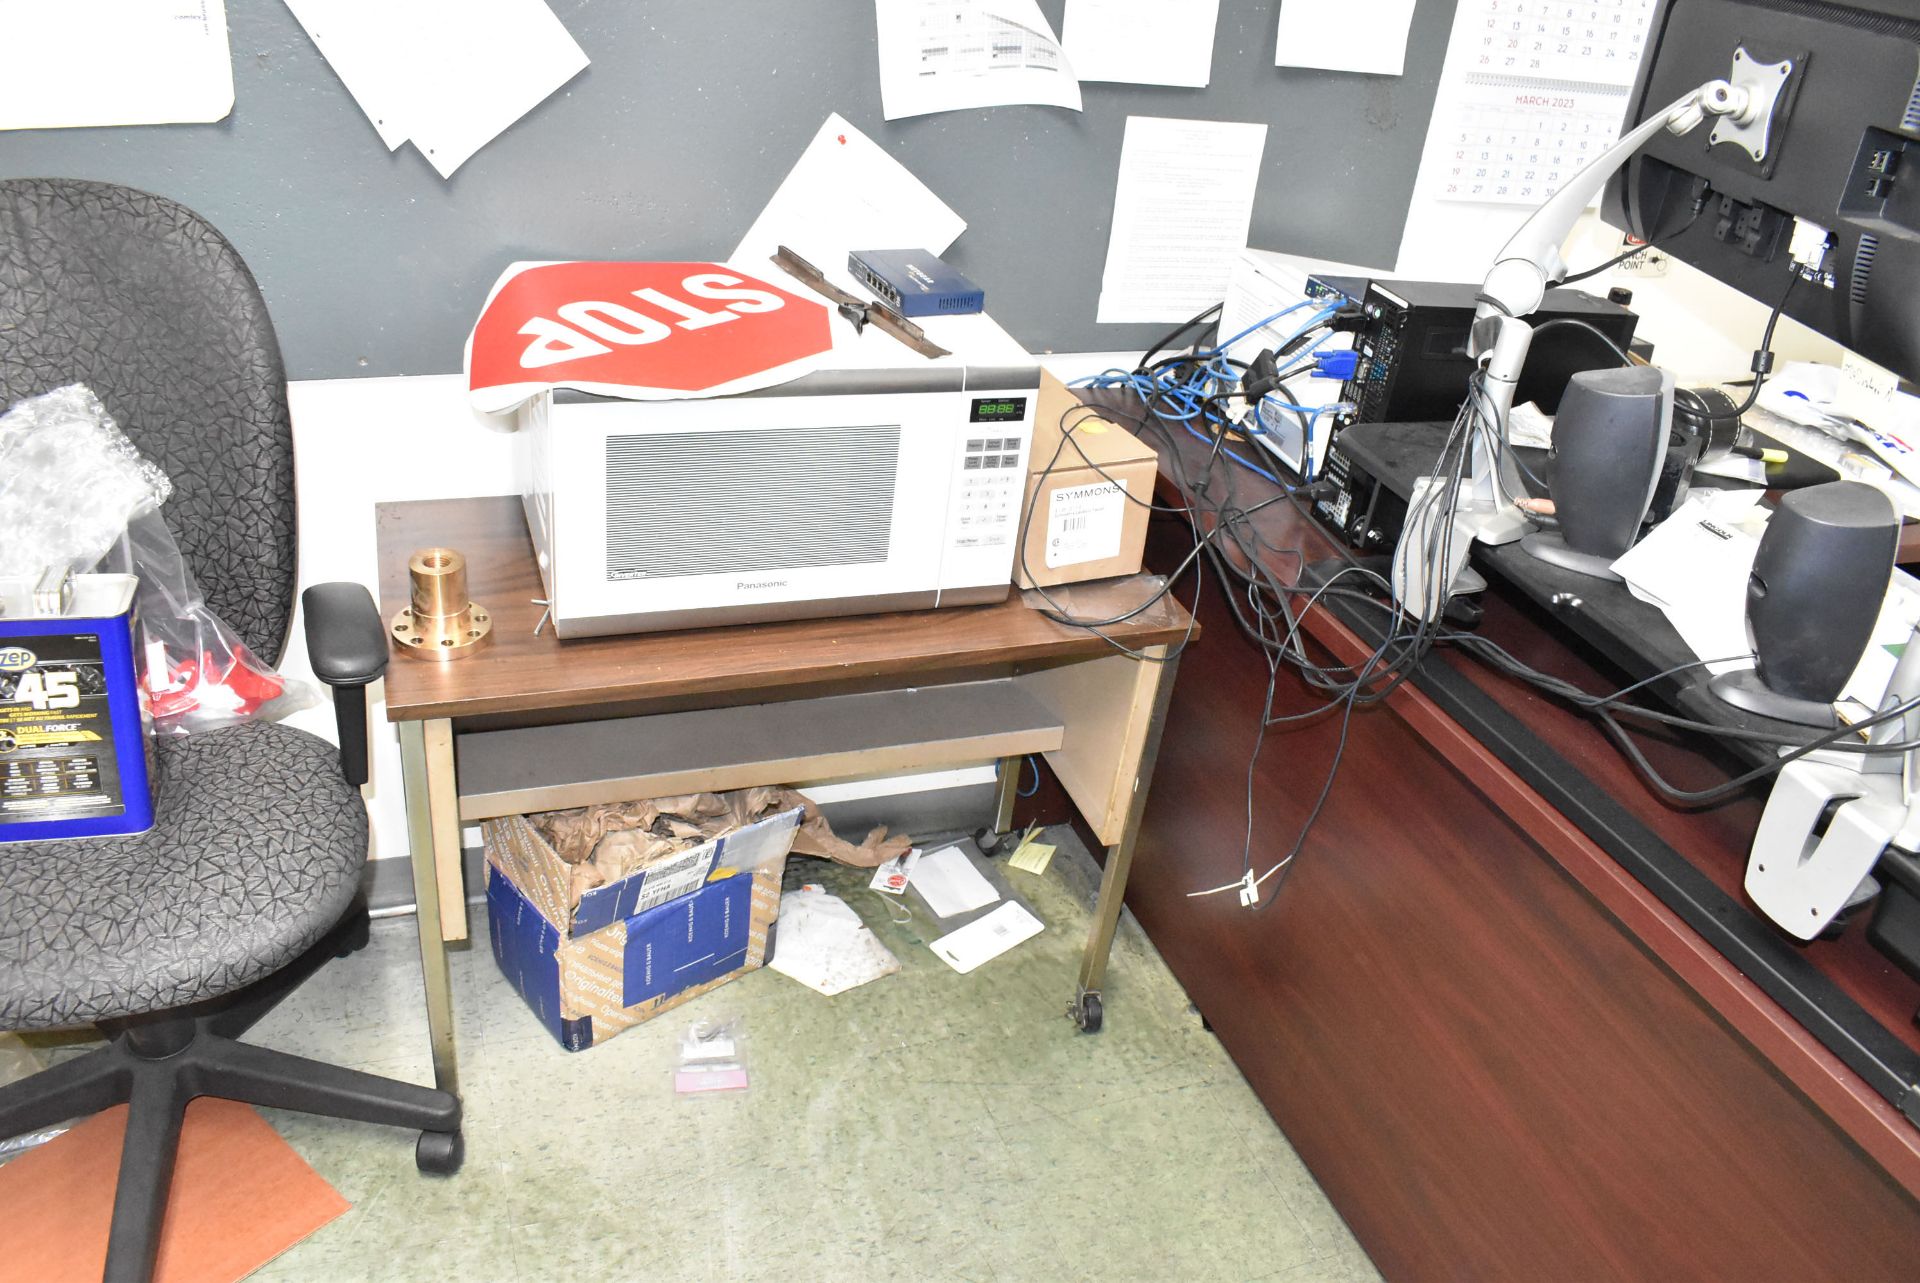 LOT/ CONTENTS OF OFFICE - INCLUDING FILE CABINET, STEEL SHELF, (2) DESKS, OFFICE CHAIRS, MICROWAVE & - Image 3 of 3